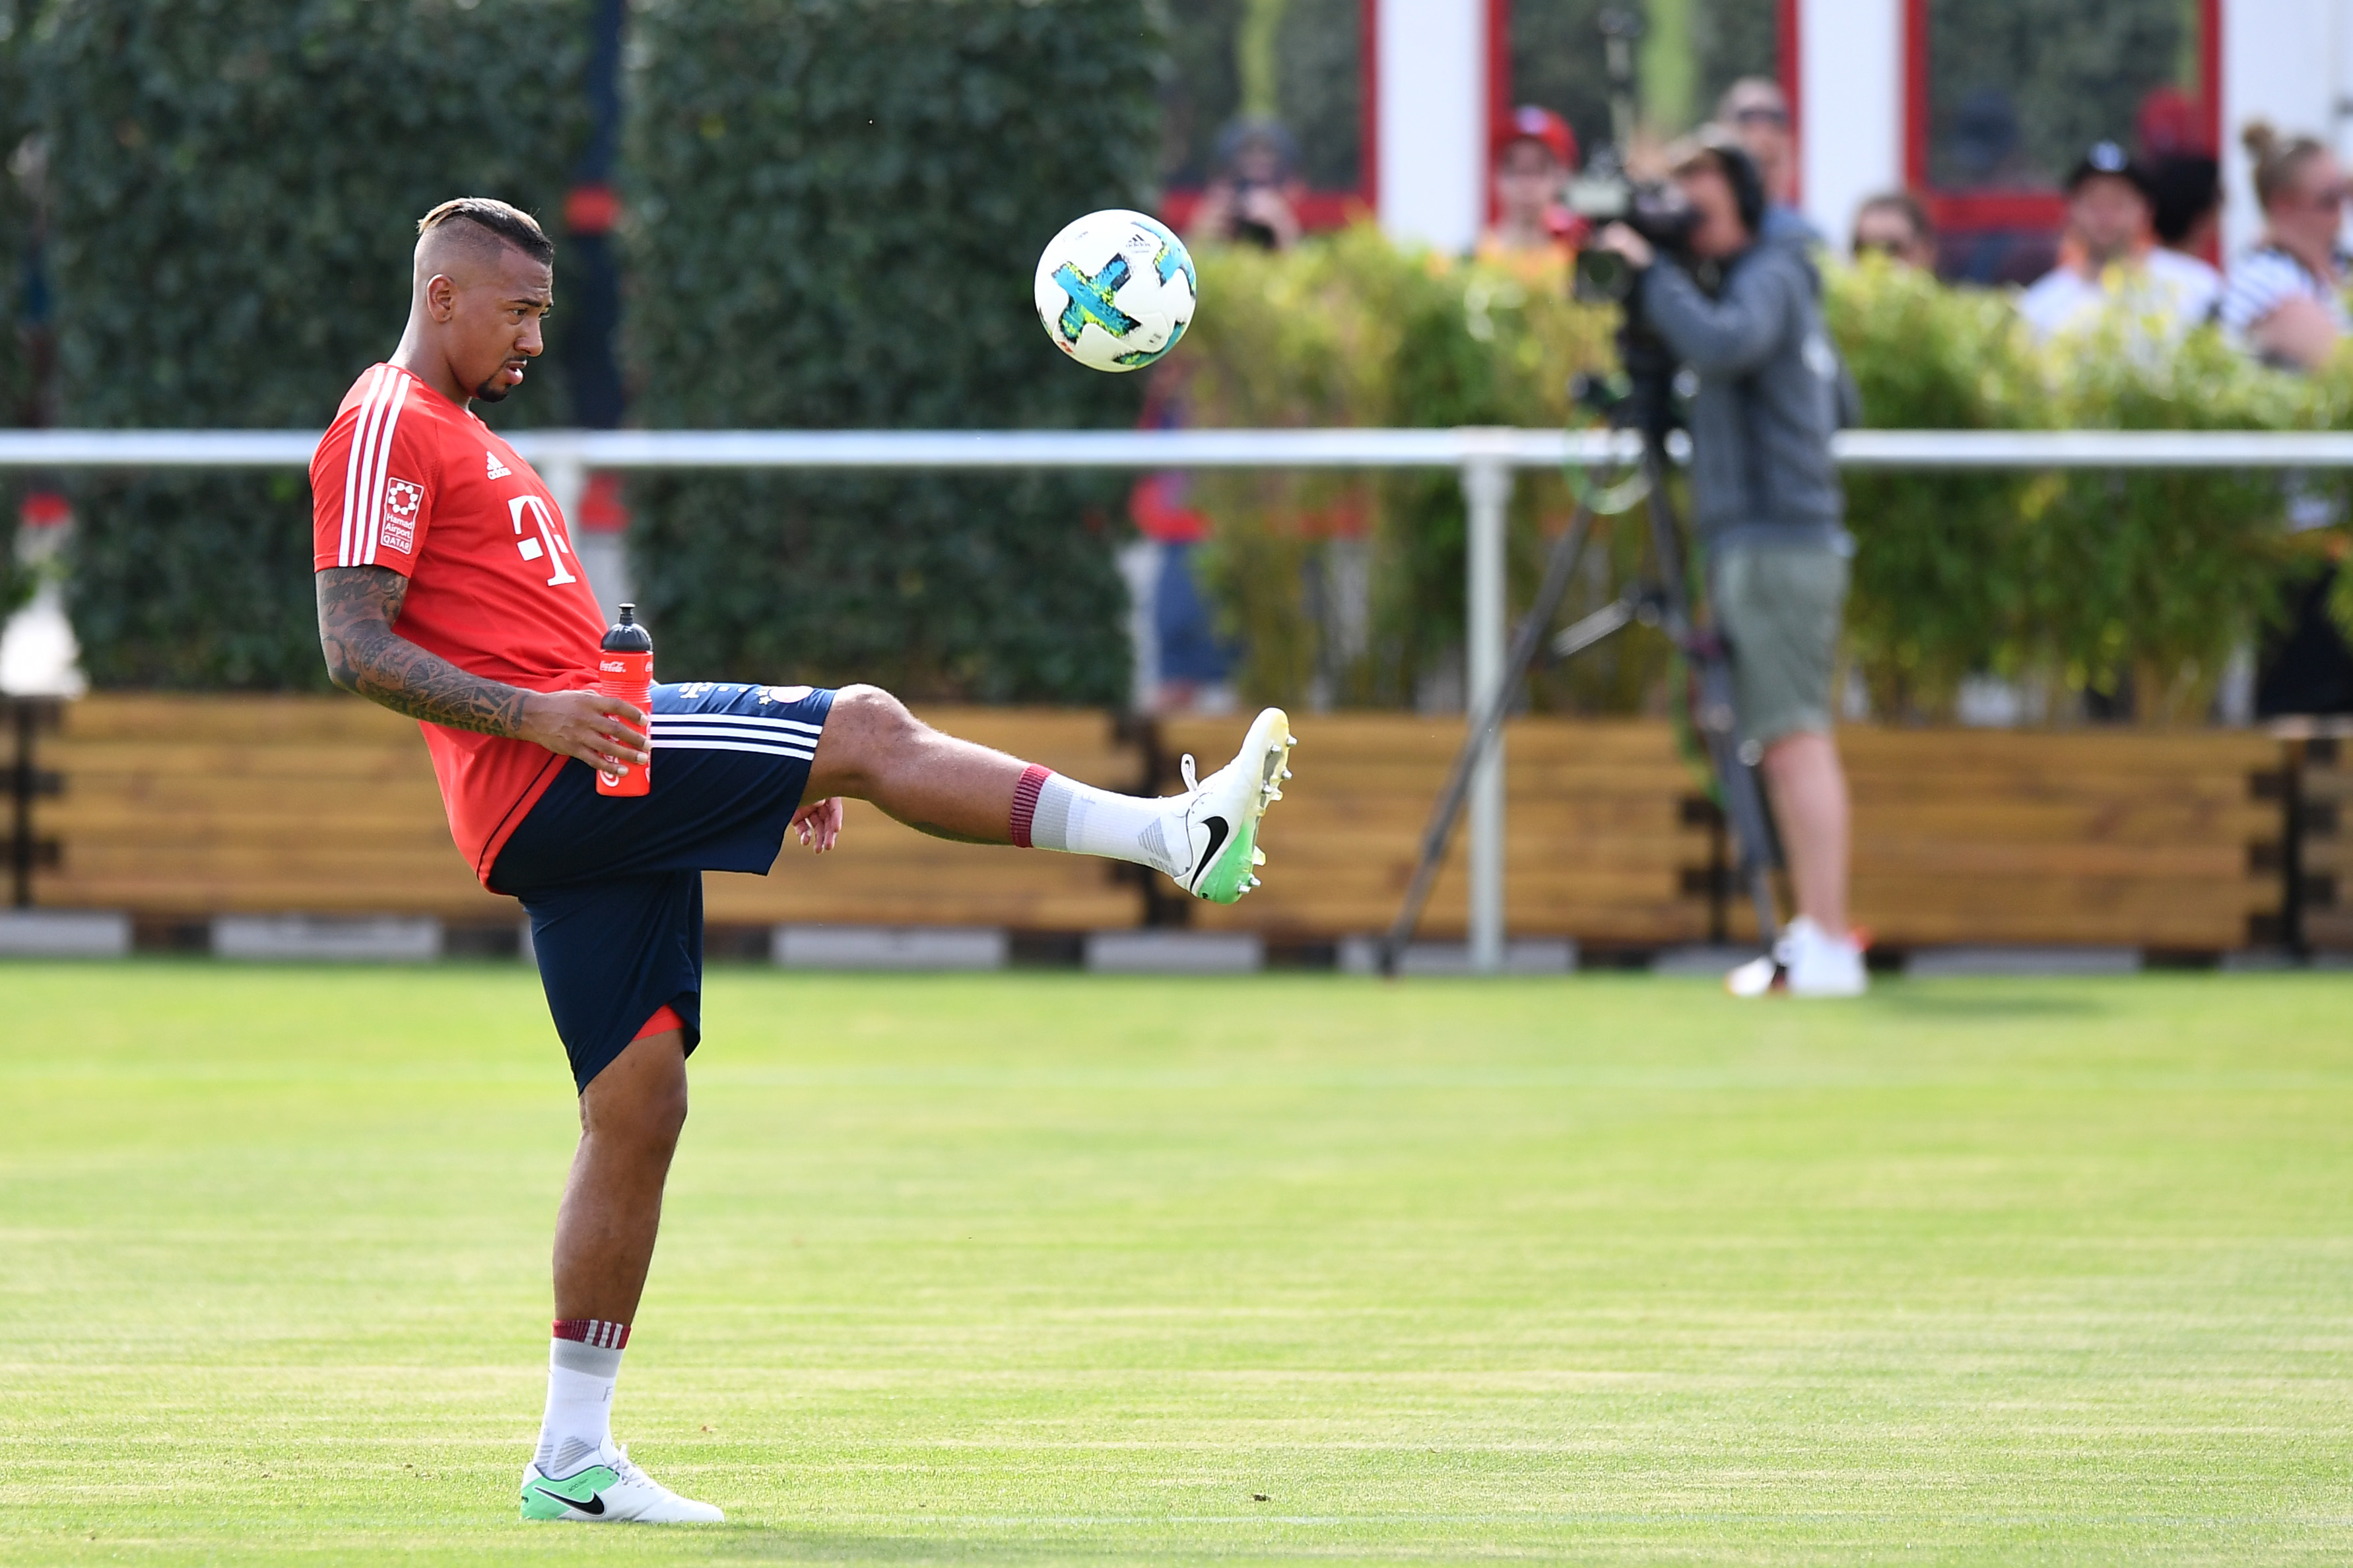 MUNICH, GERMANY - JULY 10: Jerome Boateng of FC Bayern Muenchen in action during a training session at Saebener Strasse training ground on July 10, 2017 in Munich, Germany. (Photo by Sebastian Widmann/Bongarts/Getty Images)